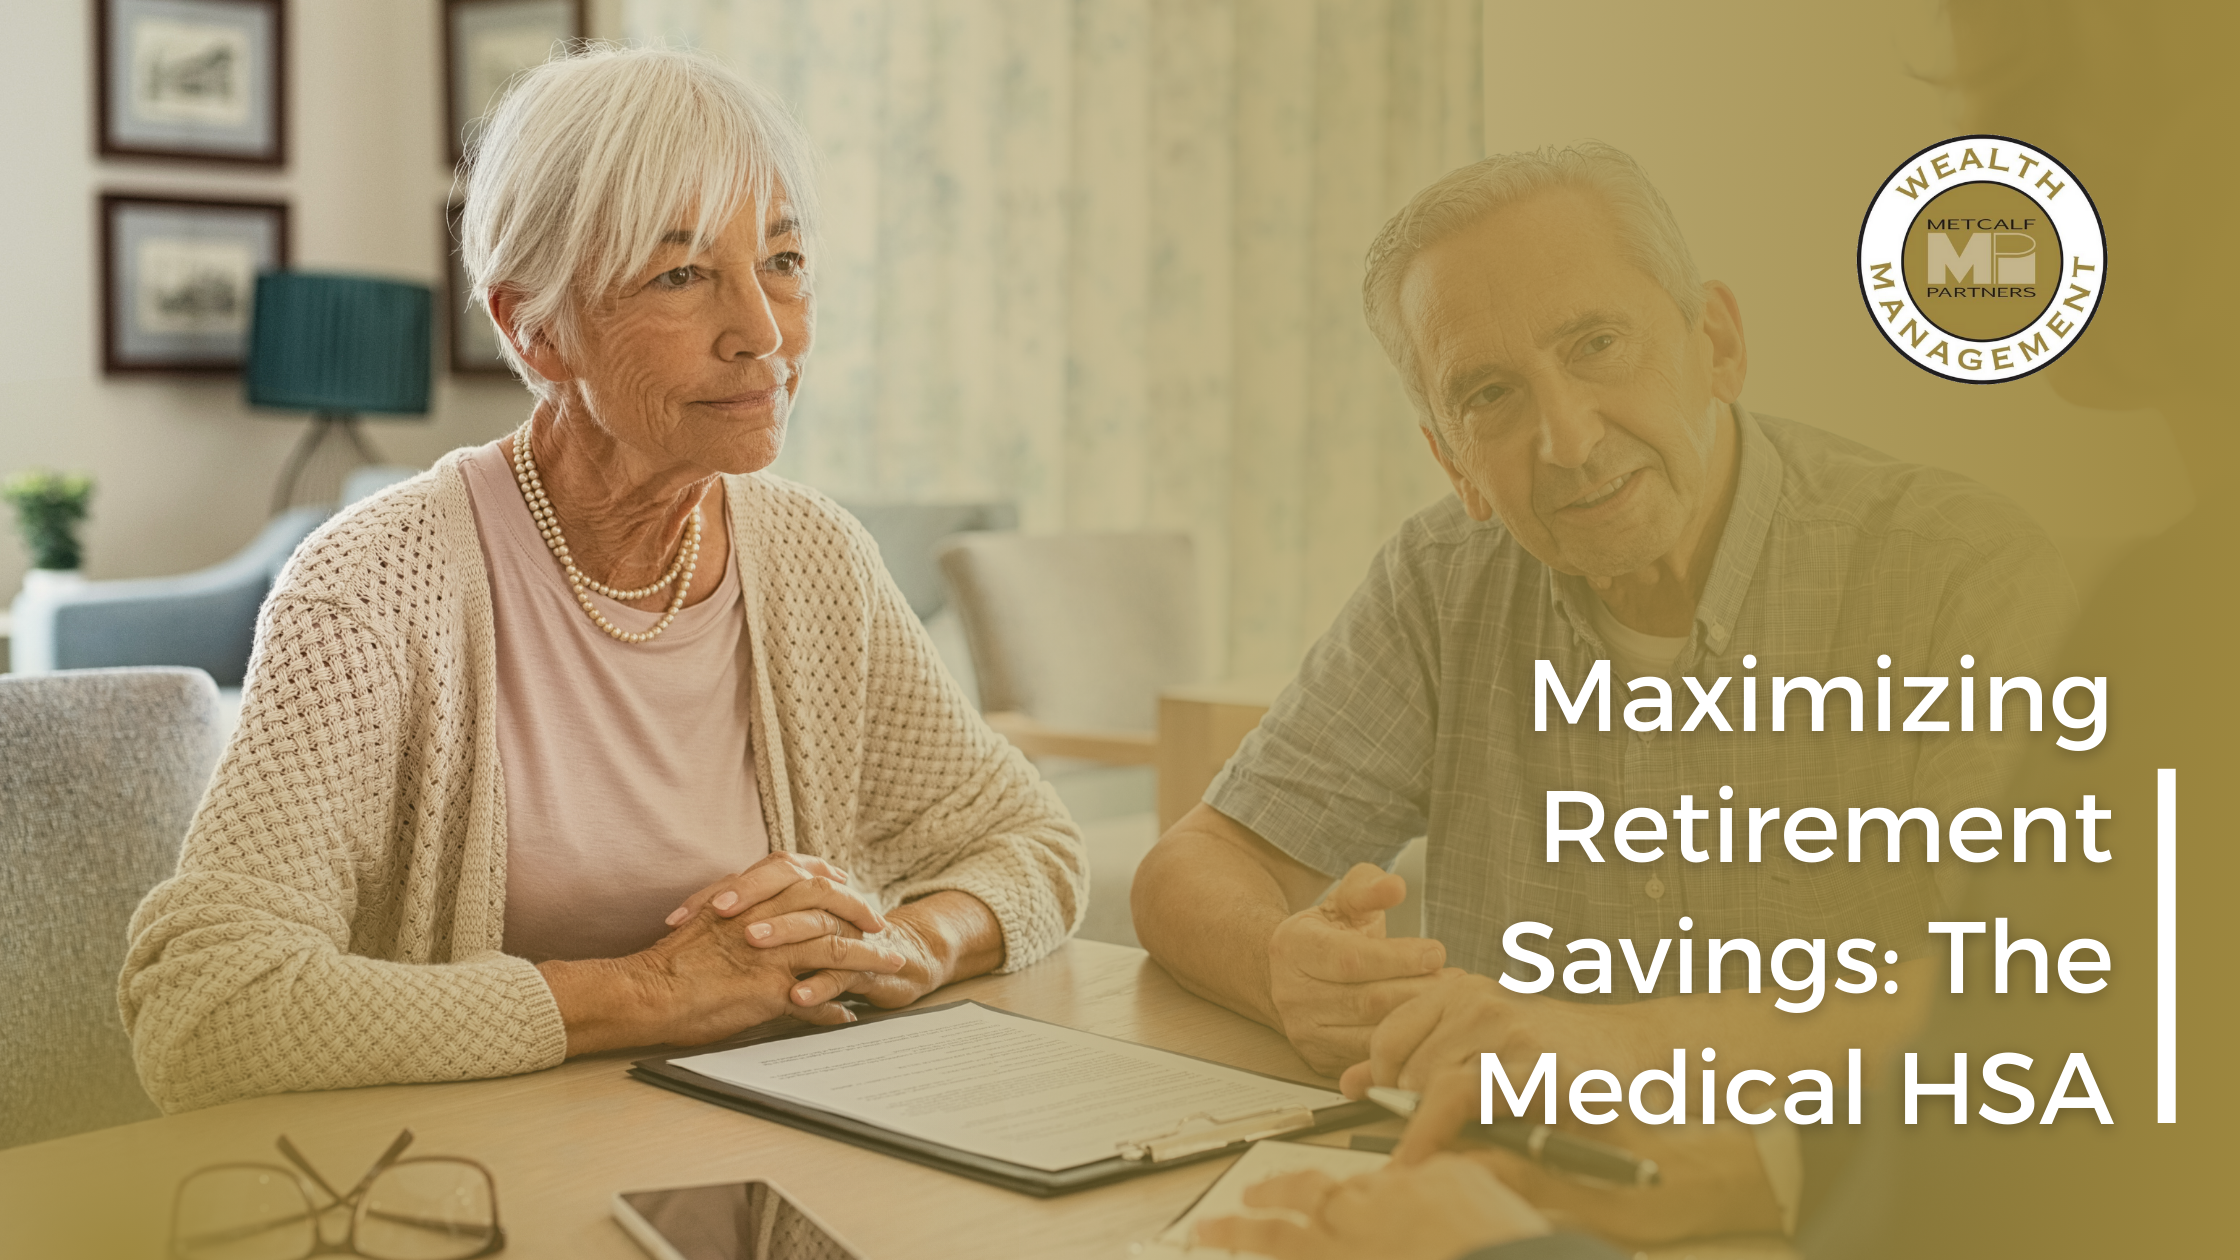 Featured image for “Maximizing Retirement Savings: The Medical HSA”